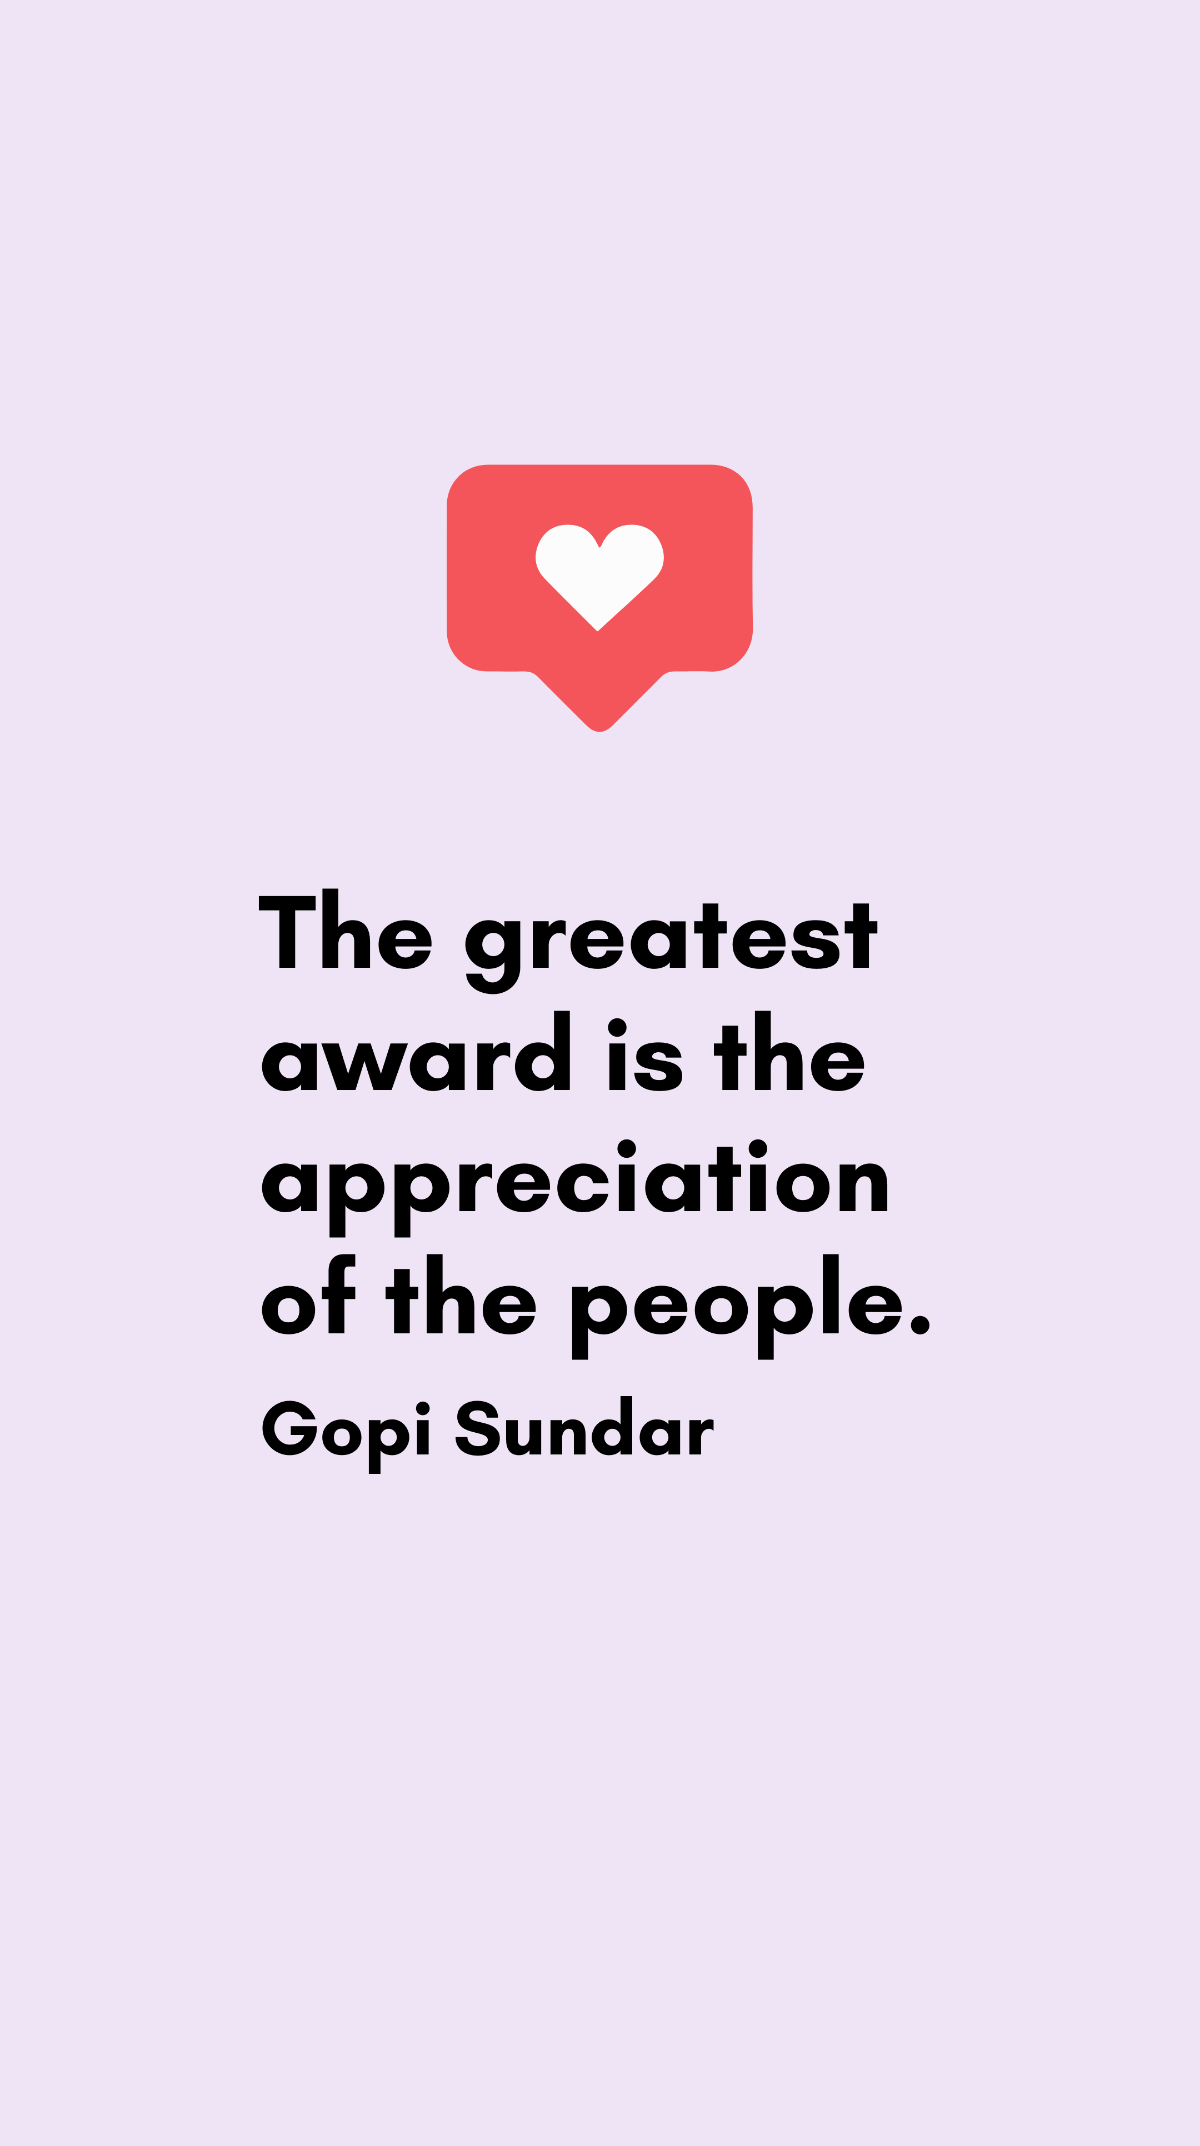 Gopi Sundar - The greatest award is the appreciation of the people. Template